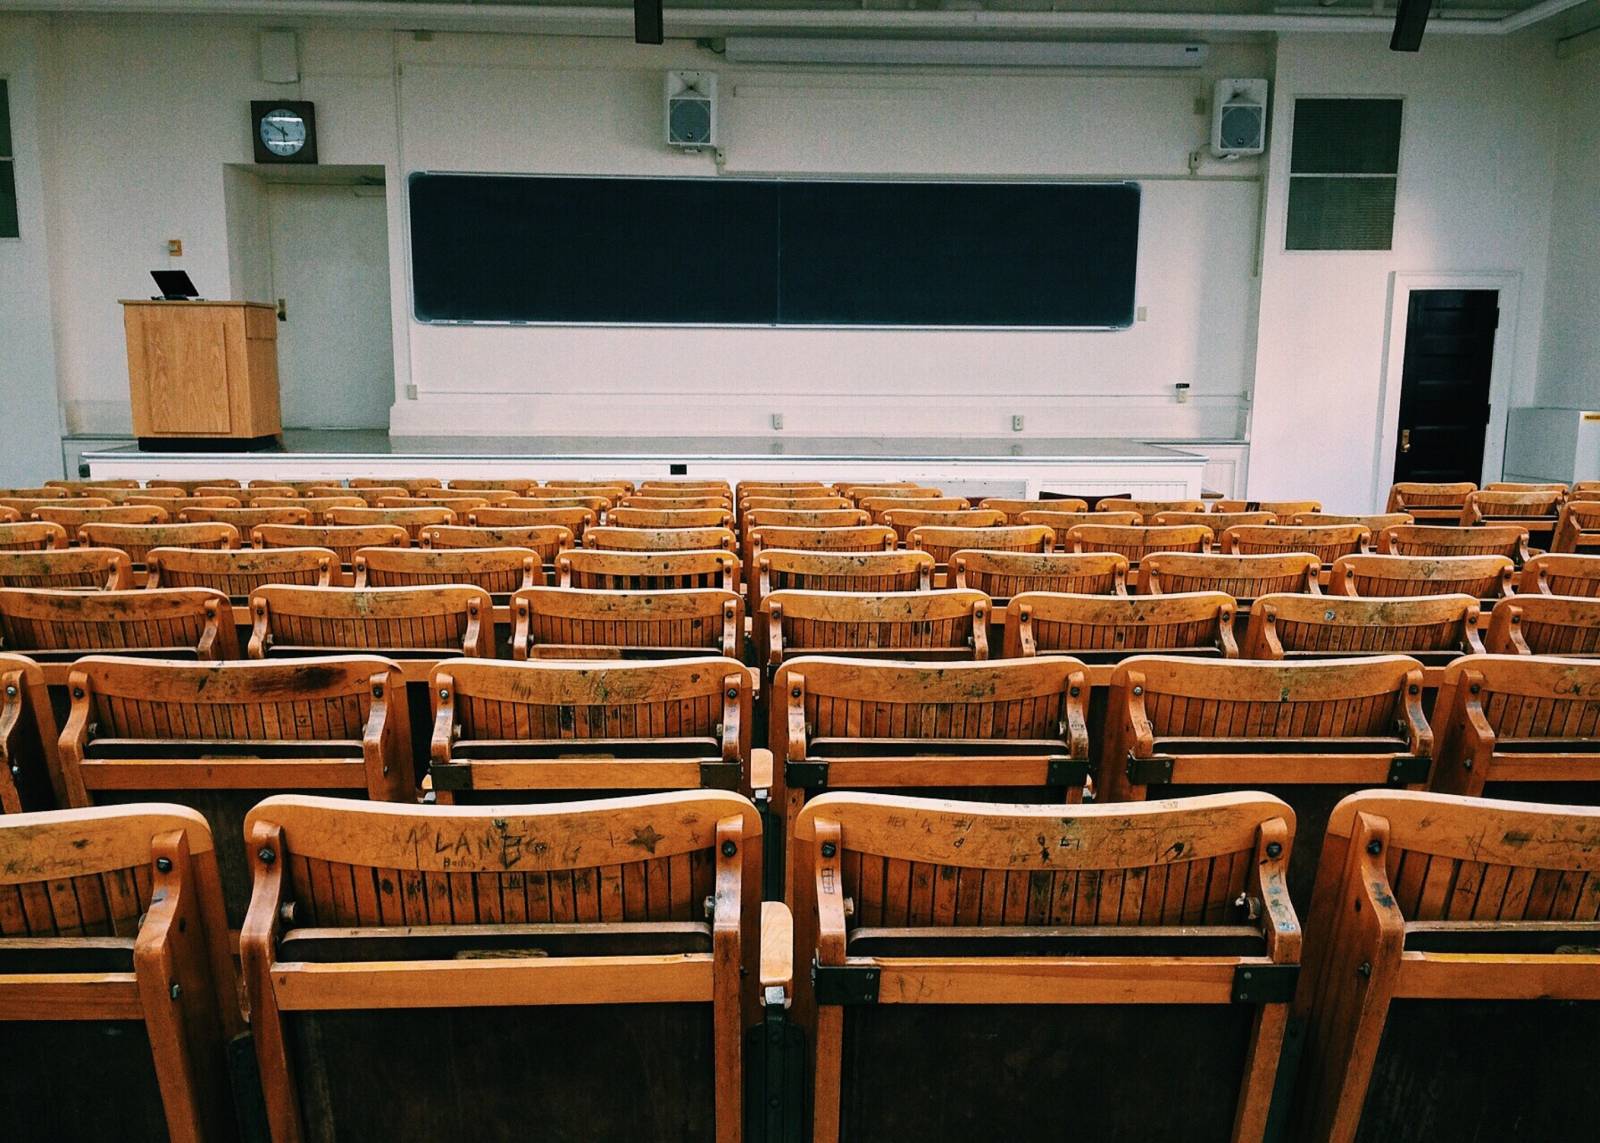 An auditorium full of empty wooden chairs and a blackboard in the front